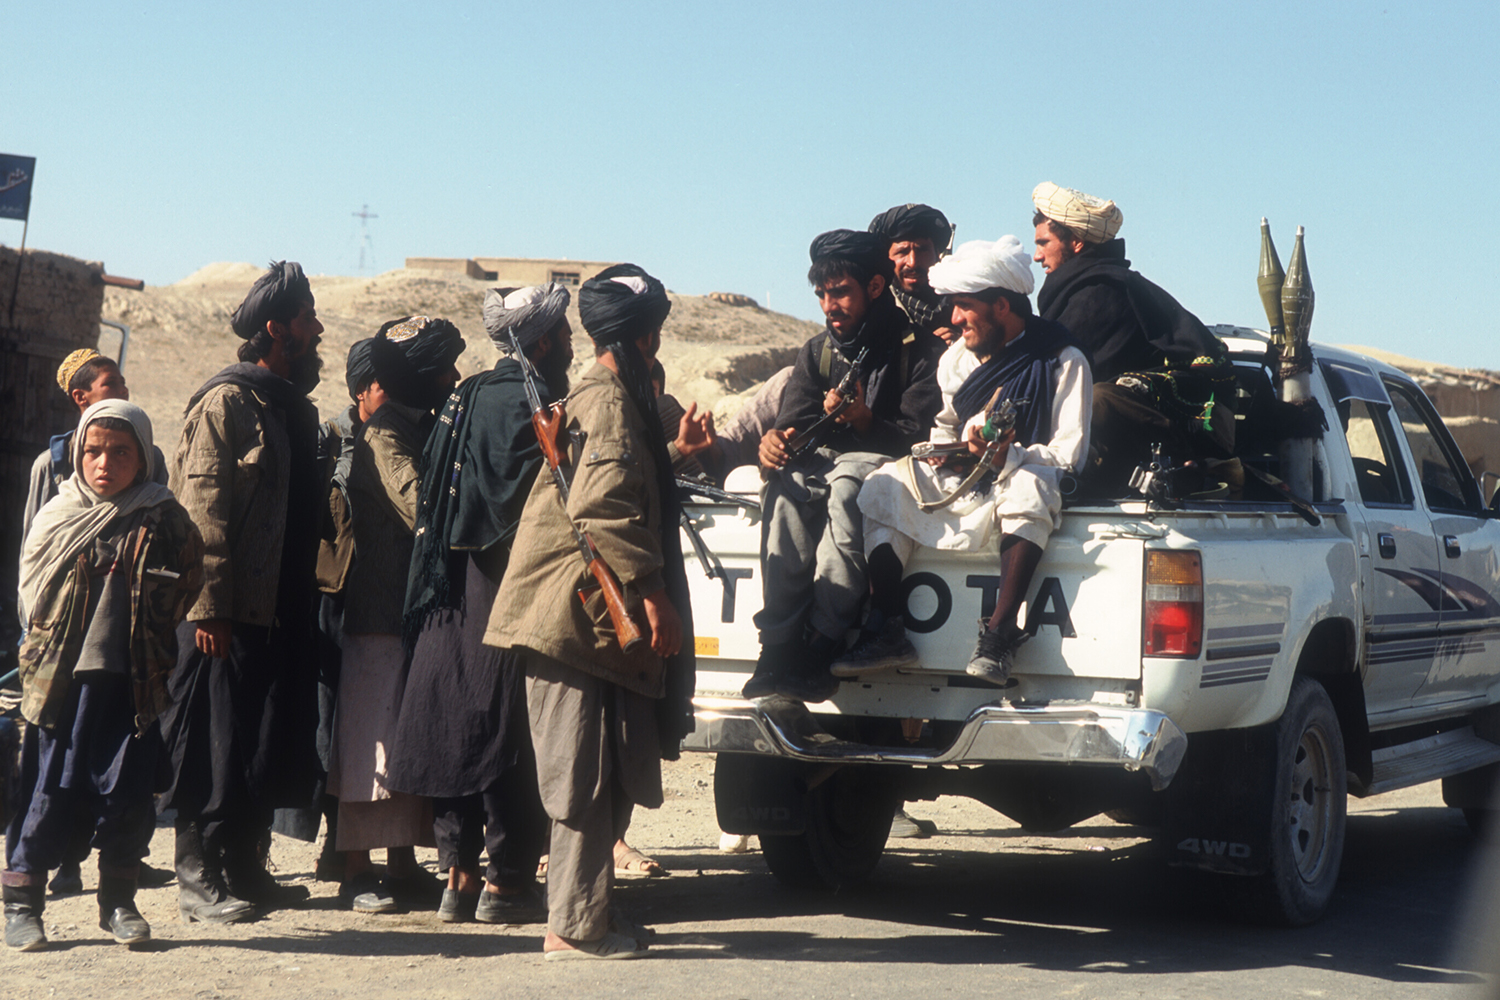 Taliban rebels with a Toyota pickup truck near Bagram Air Base on October 18, 1996. The Islamic group has a history of fighting with Toyota pickup trucks and SUVs, highlighted by their Afghanistan takeover in August 2021.